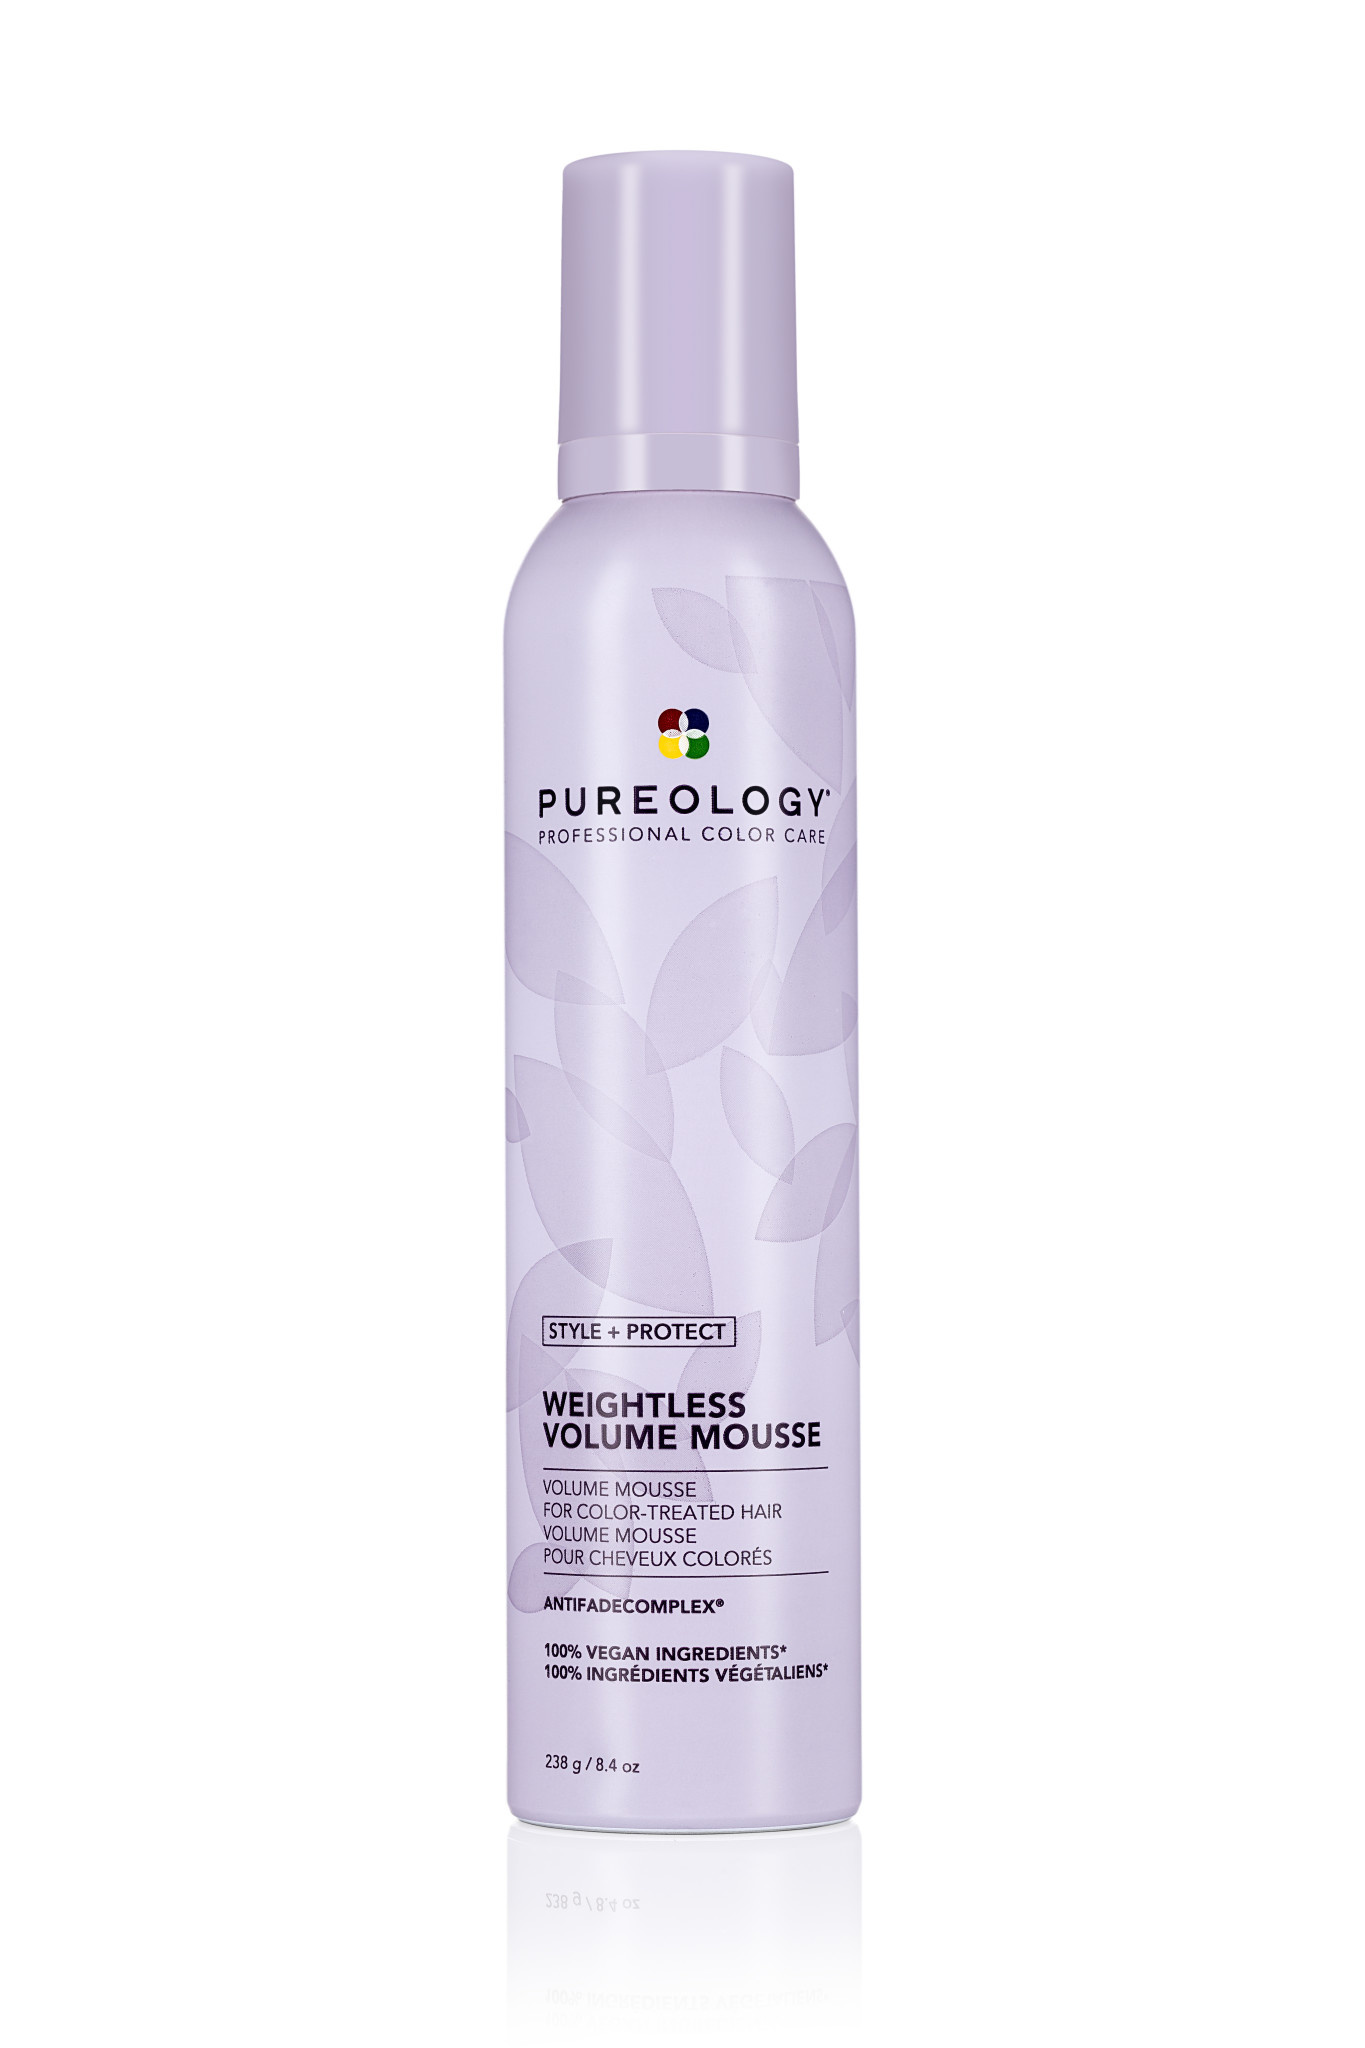 PUREOLOGY - STYLE + PROTECT Weightless Volume Mousse 238g (8.4 oz)